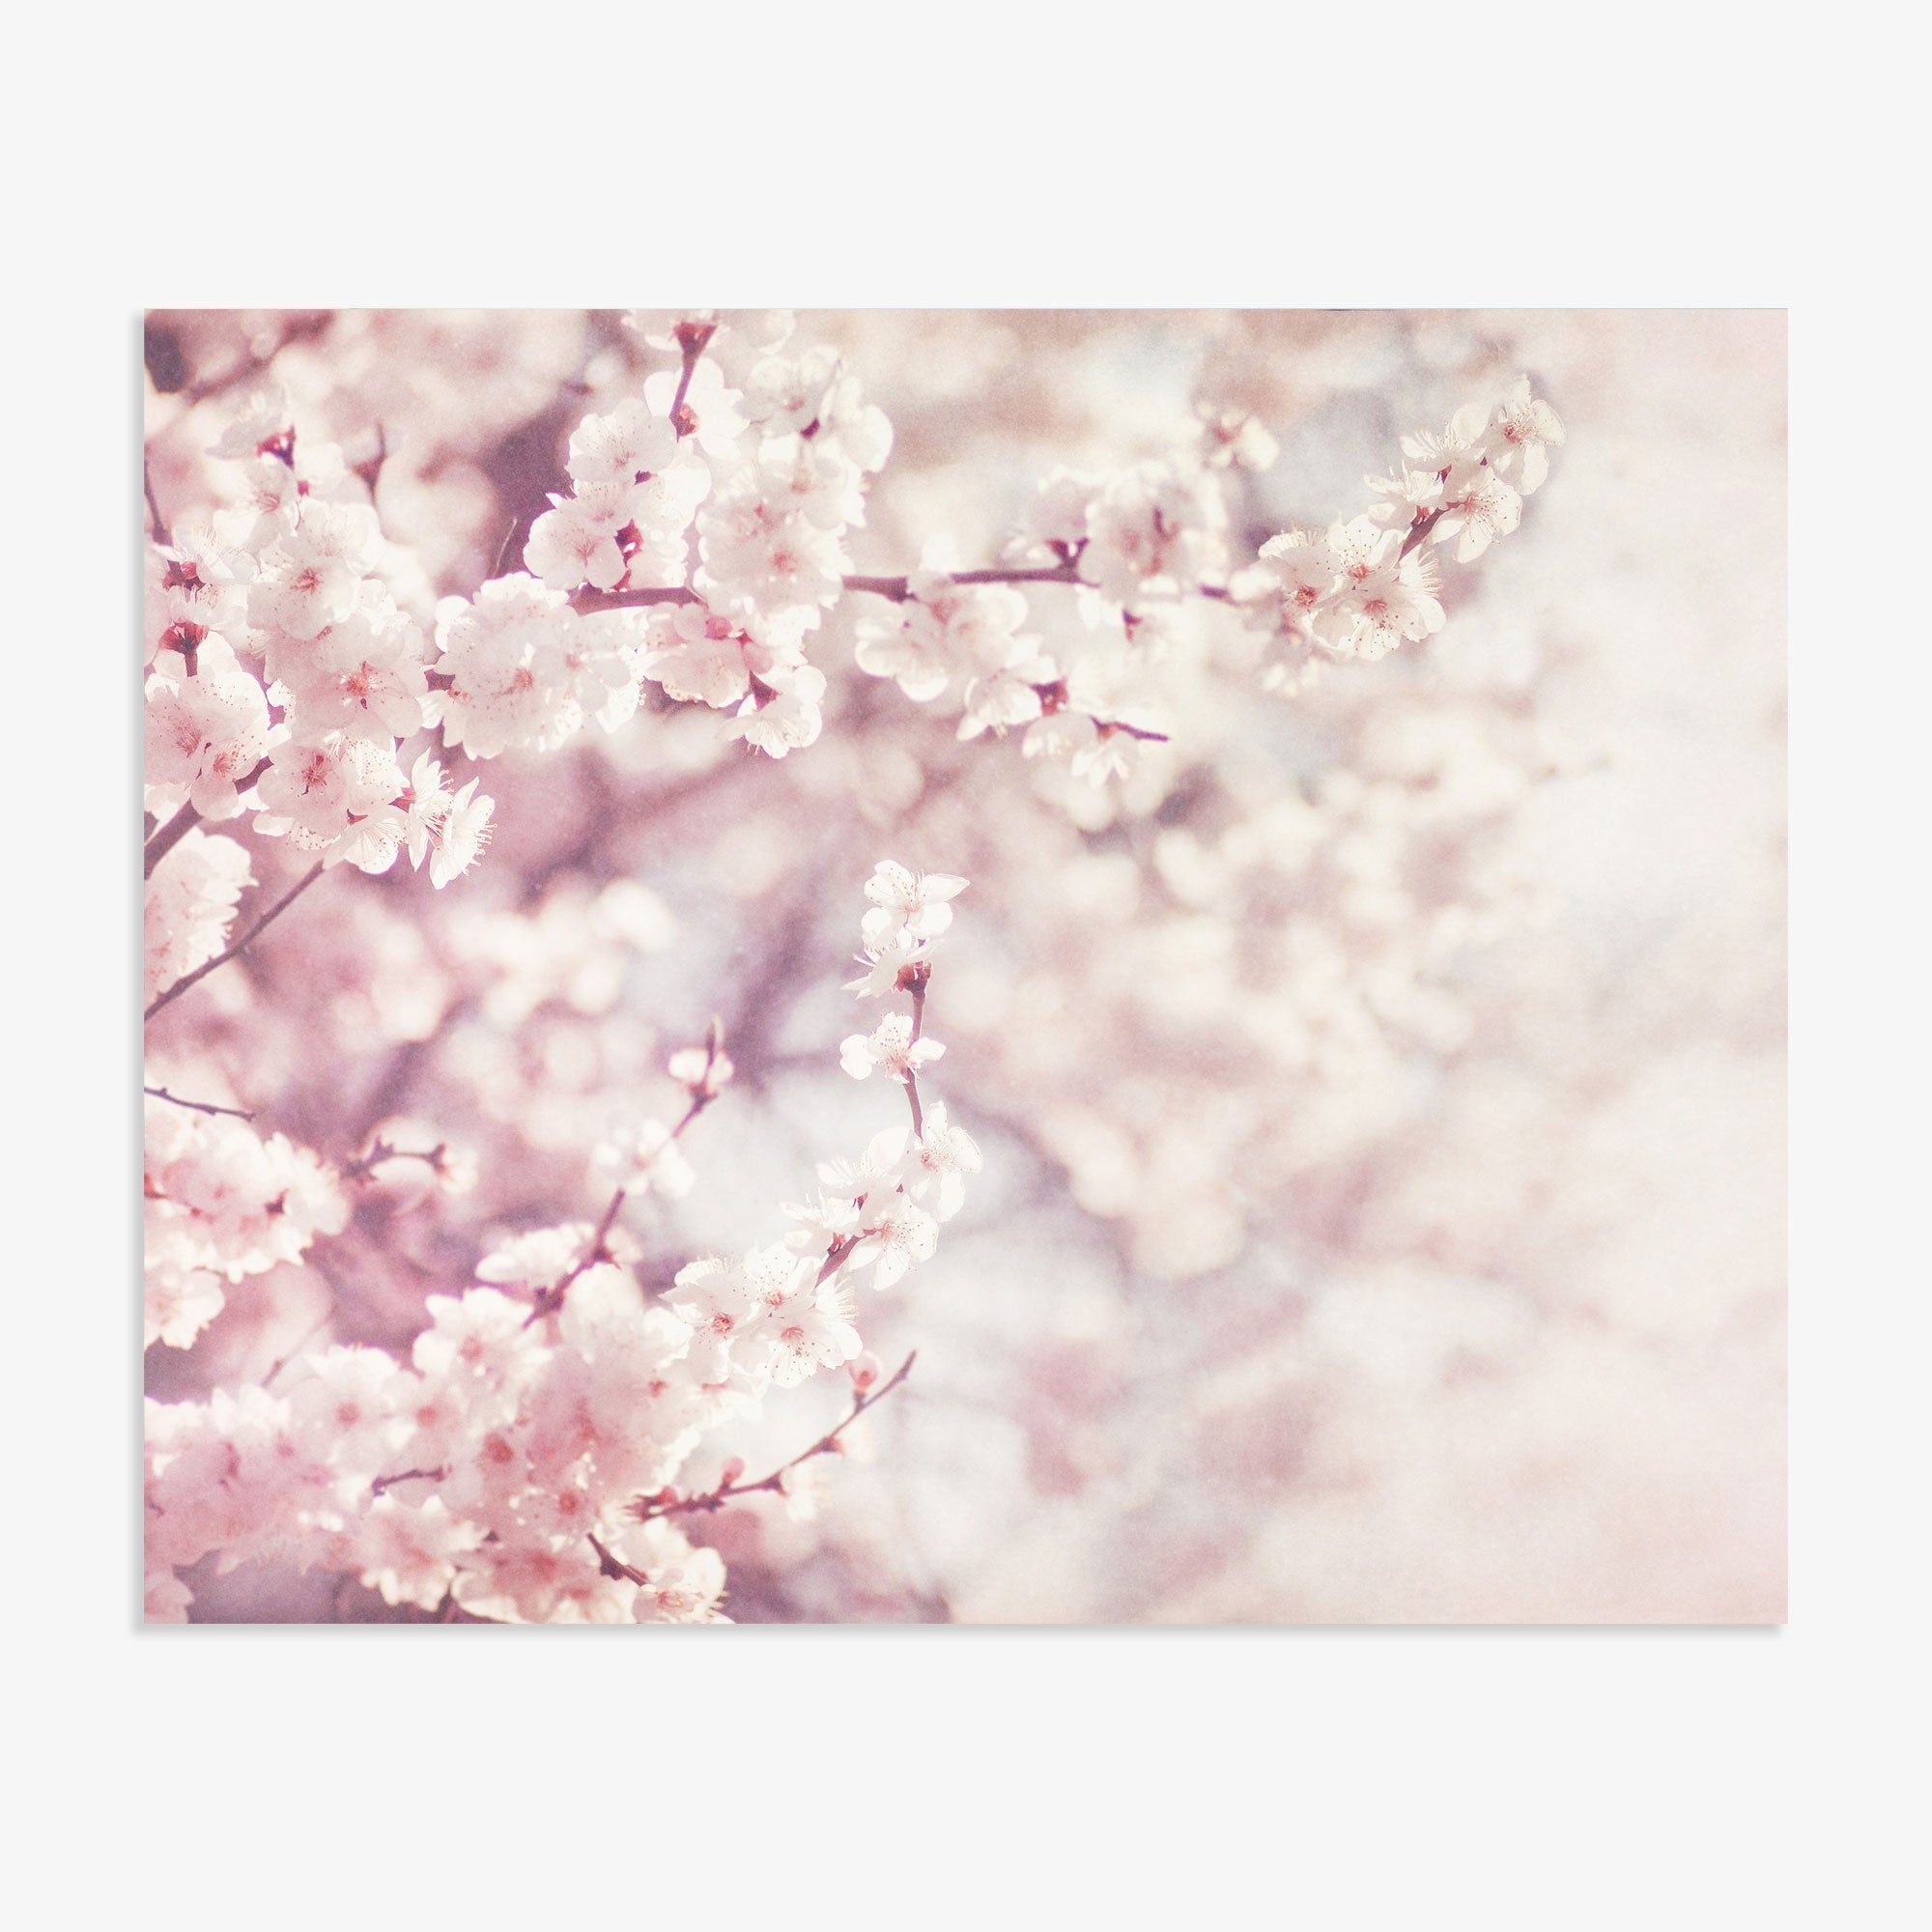 A dreamy image of delicate pink cherry blossoms in full bloom, set against a soft, textured background, conveying a sense of serene spring beauty and floral elegance featuring the Pink Floral Print &#39;Dreamy Blossom&#39; by Offley Green.